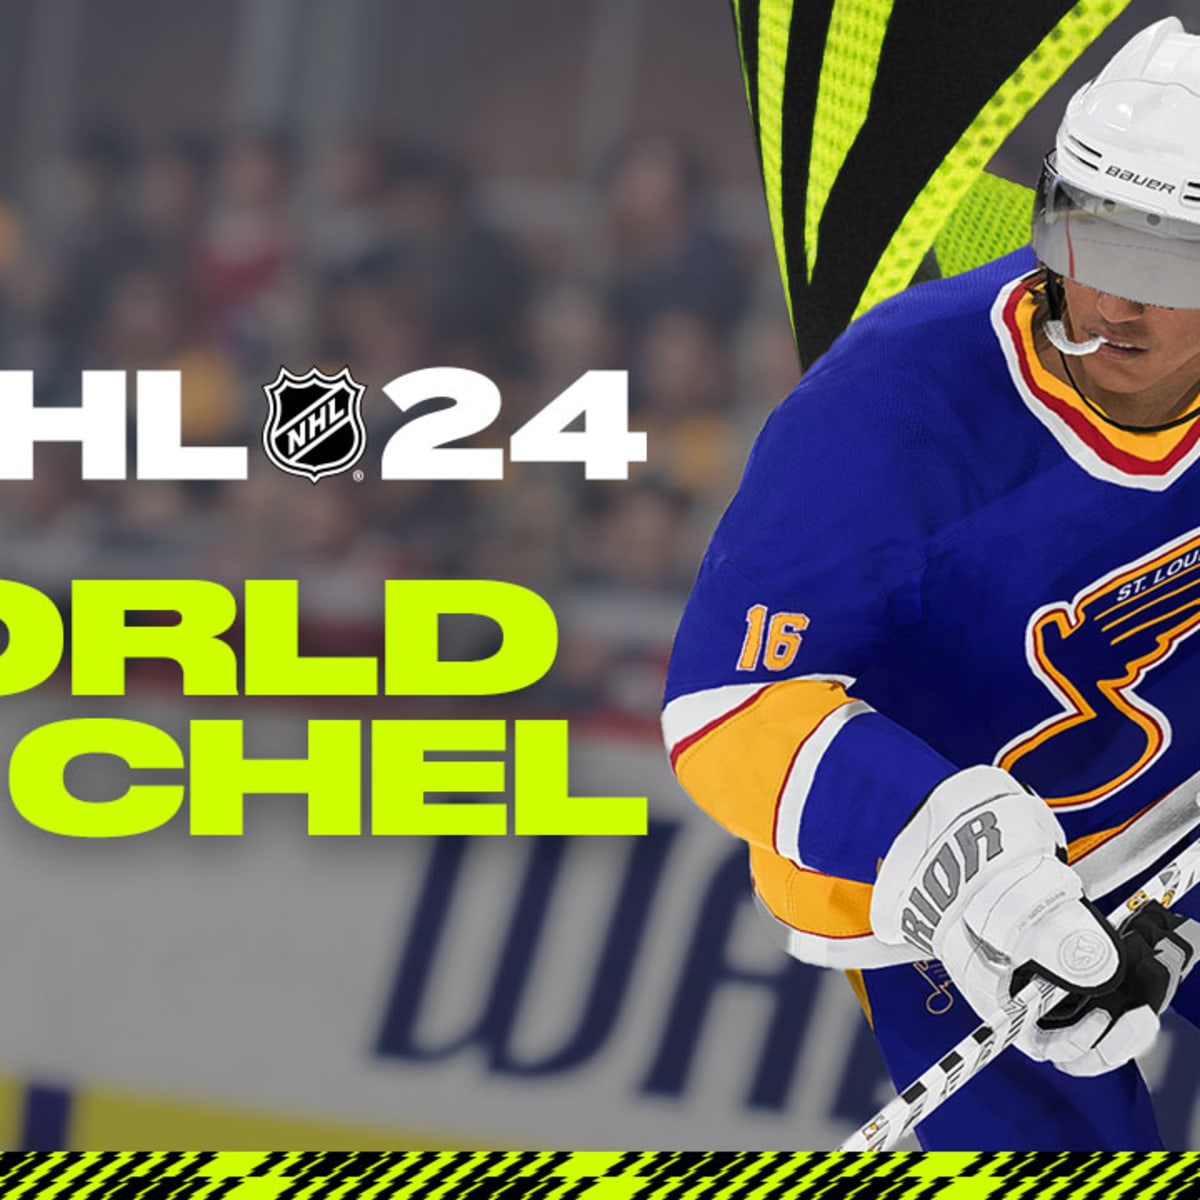 NHL 21 Release Date, Cover Athlete, Pre-Order Details, Trailer And